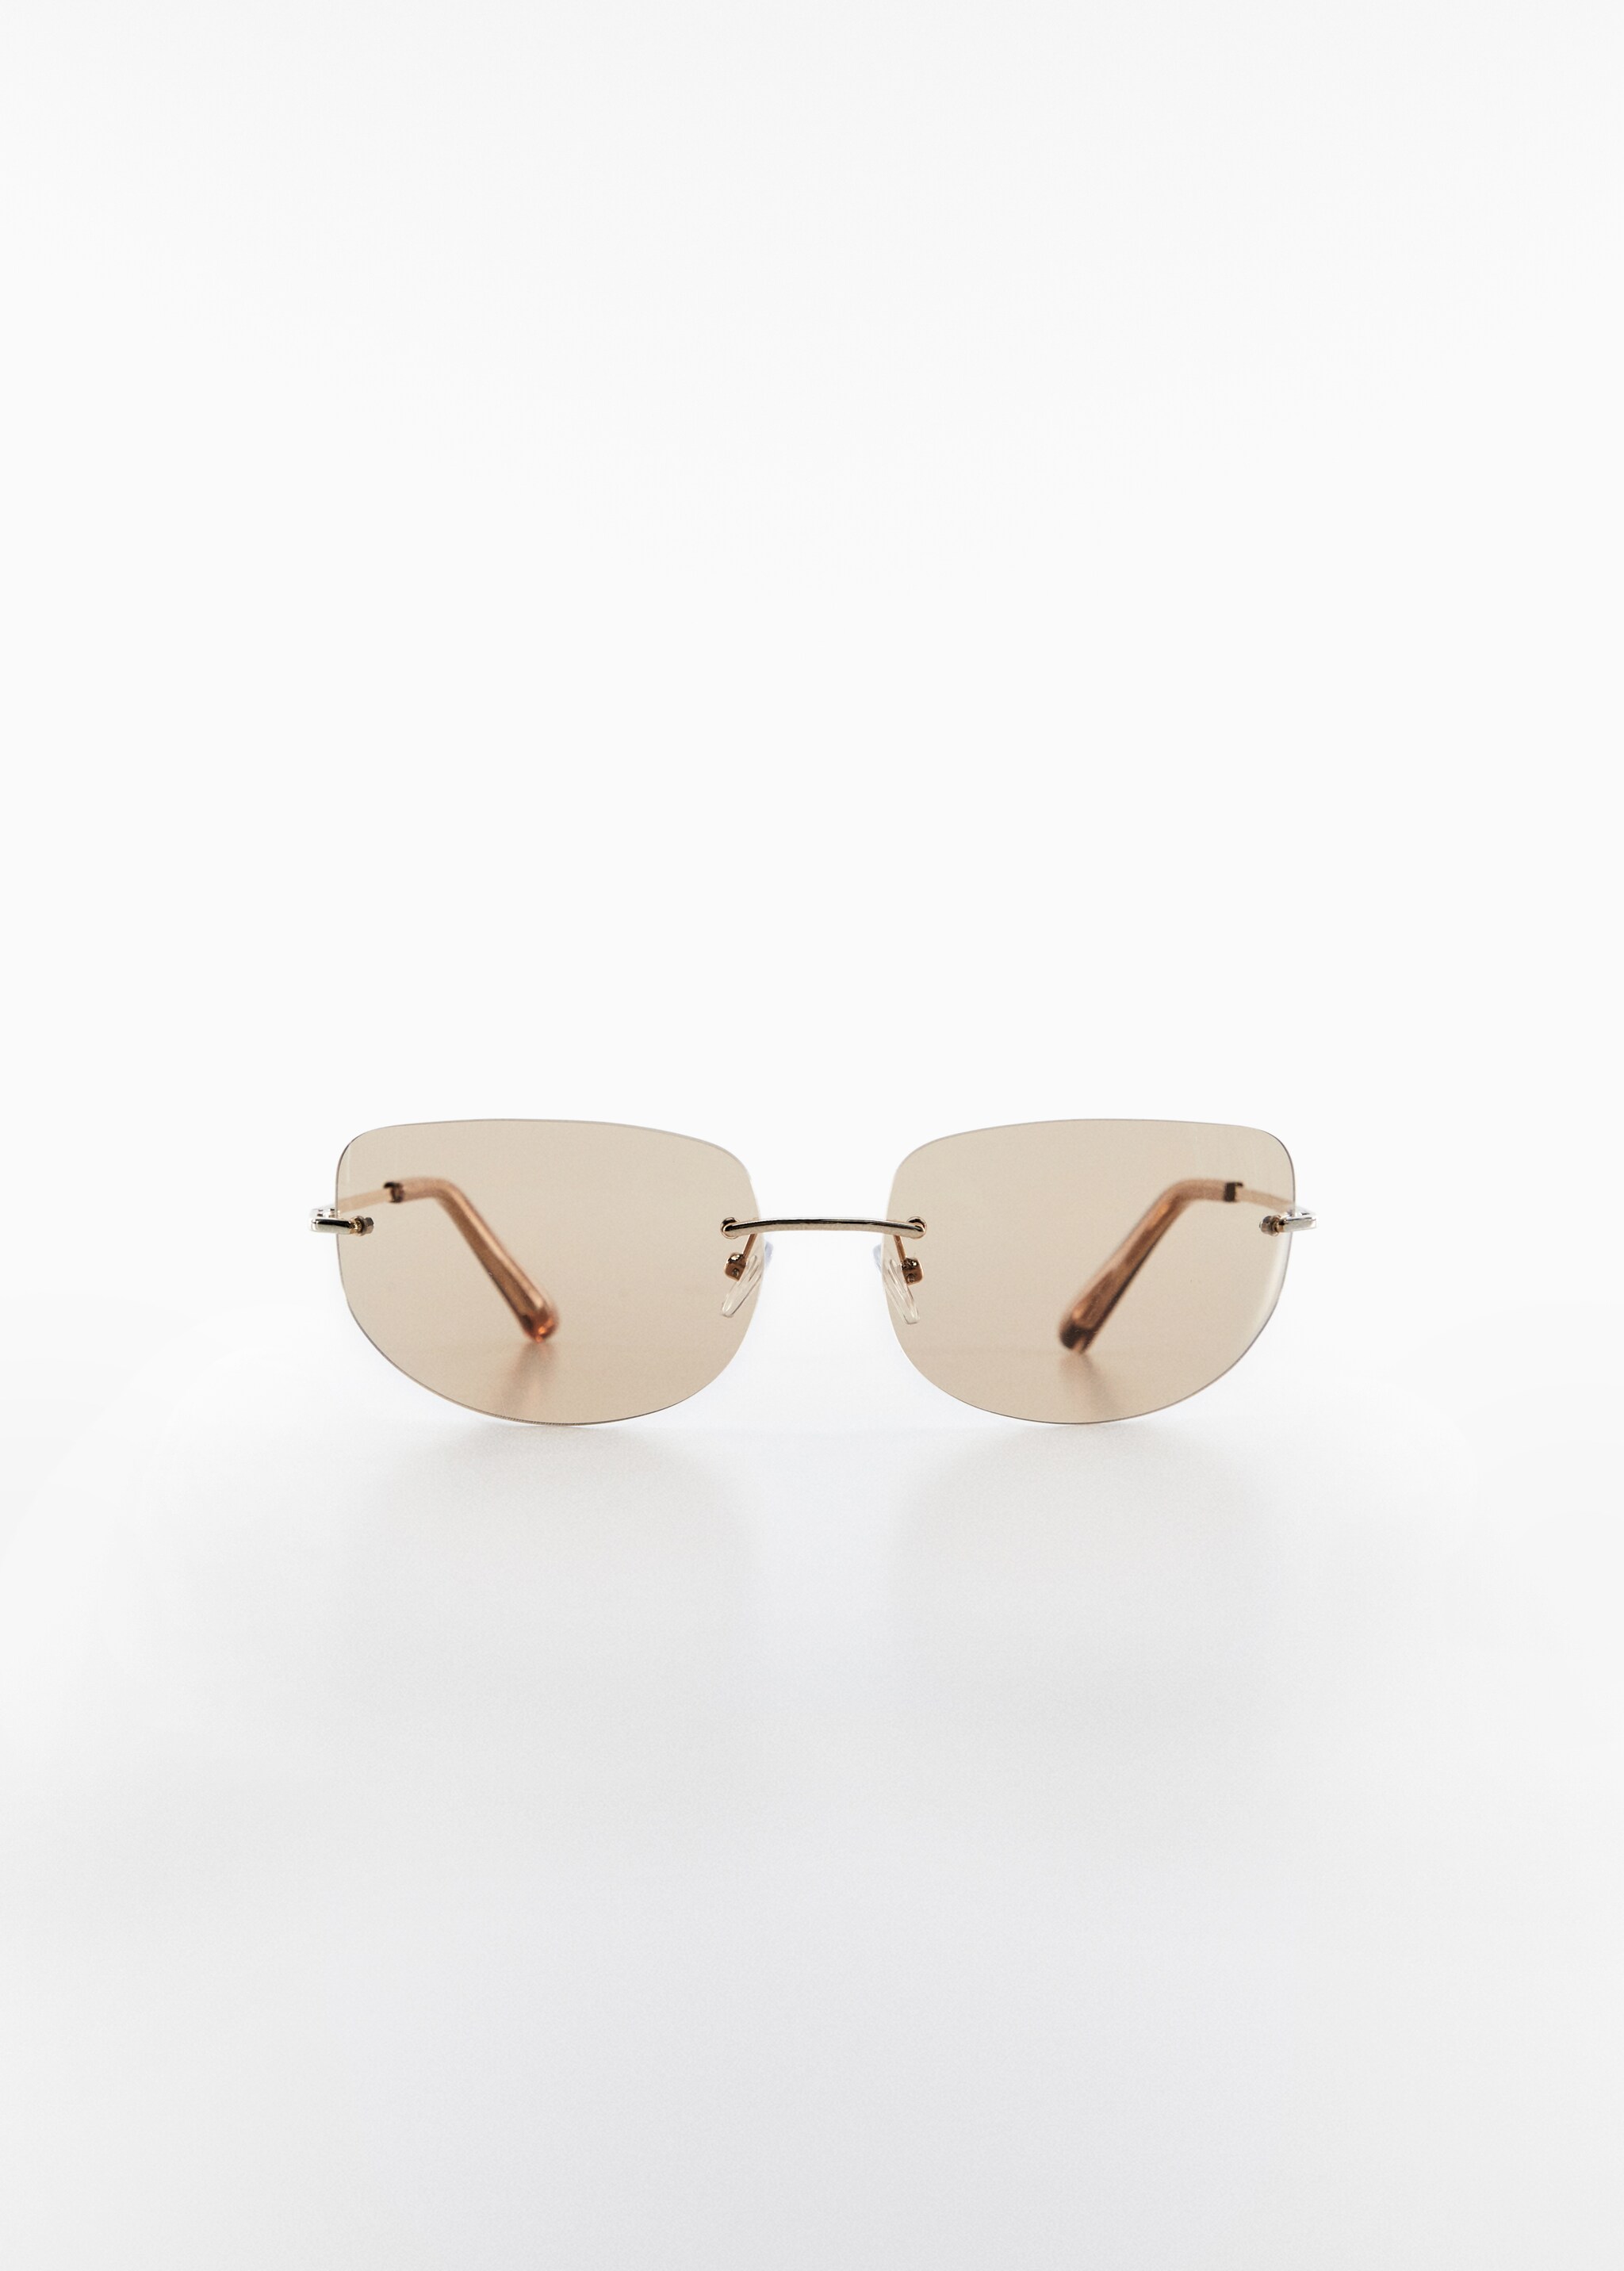 Rimless sunglasses - Article without model